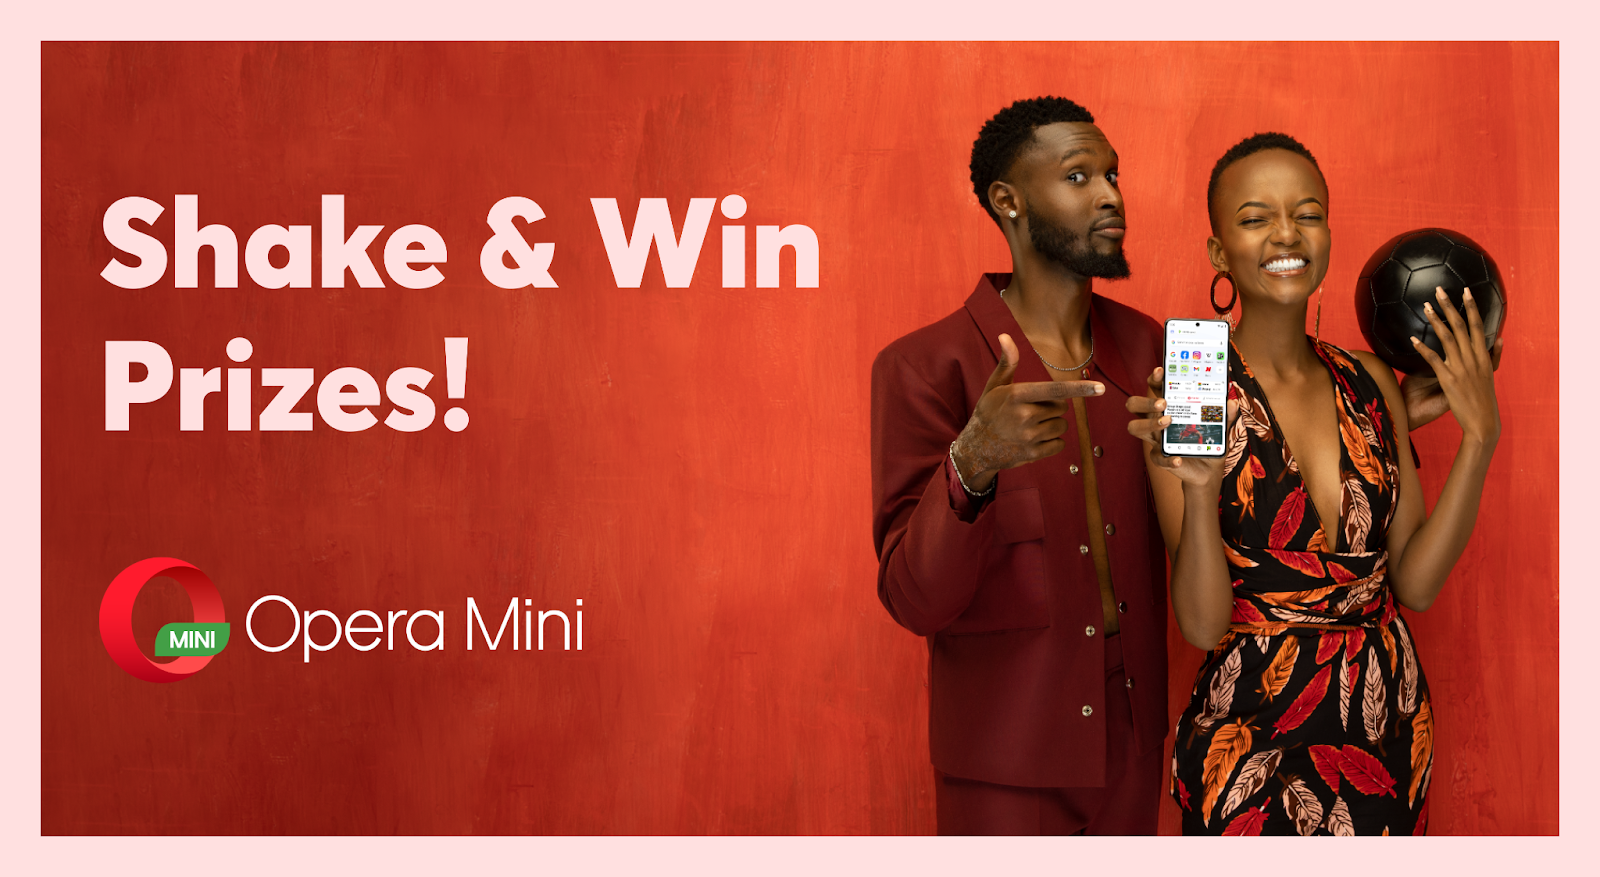 Opera kicks off its World Cup campaign with "Shake and Win," a daily contest with over $300,000 in prizes on offer.